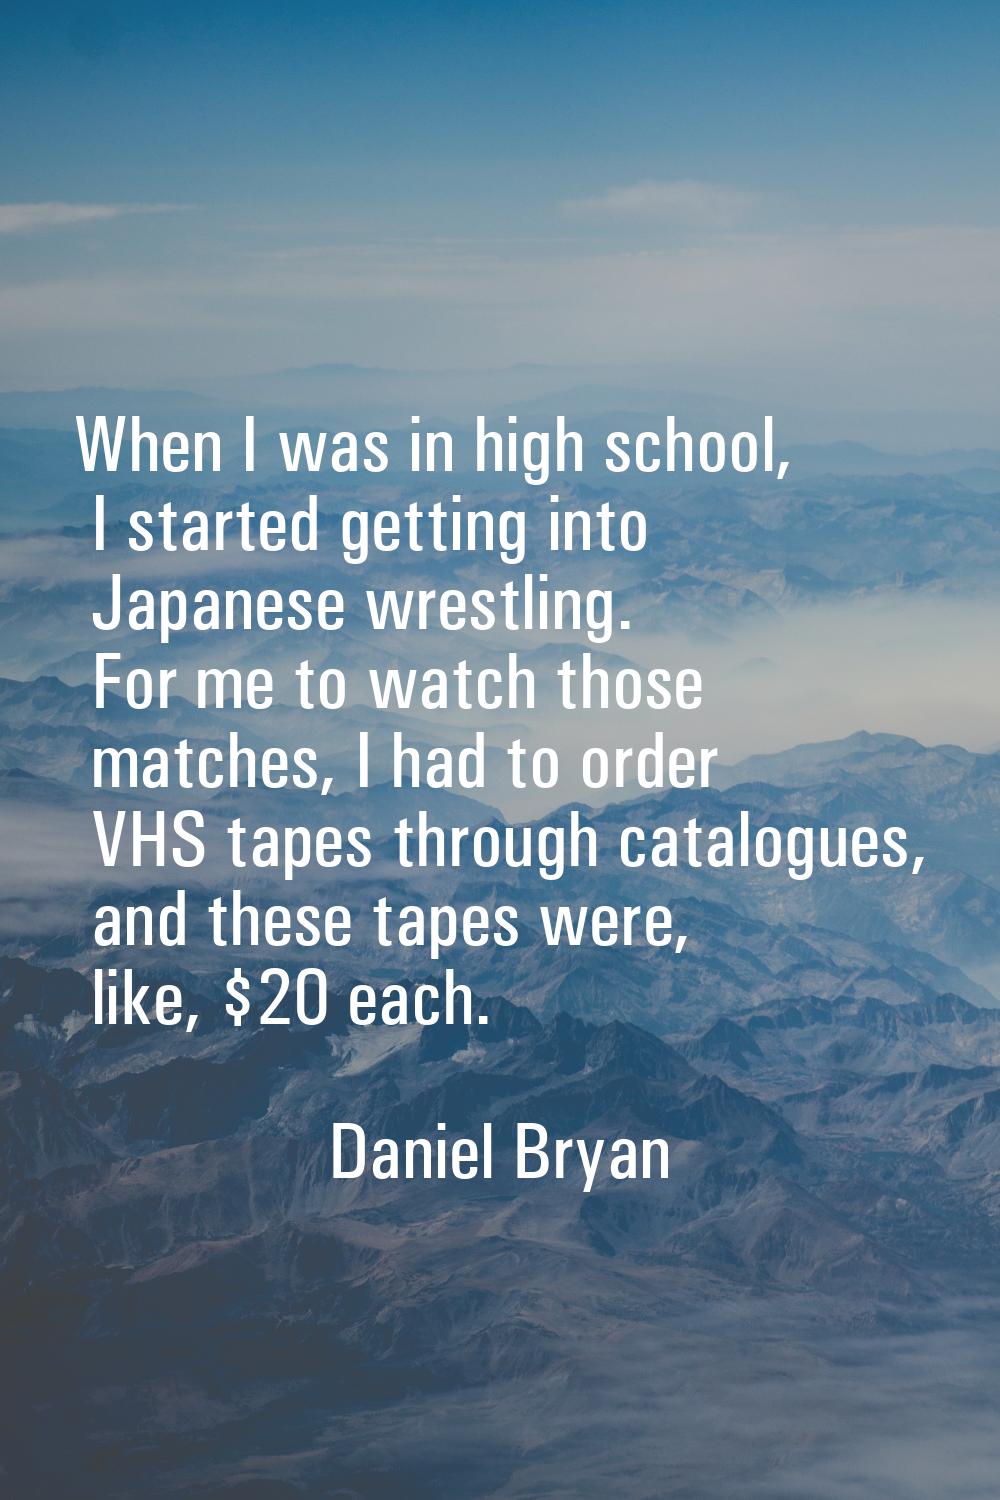 When I was in high school, I started getting into Japanese wrestling. For me to watch those matches